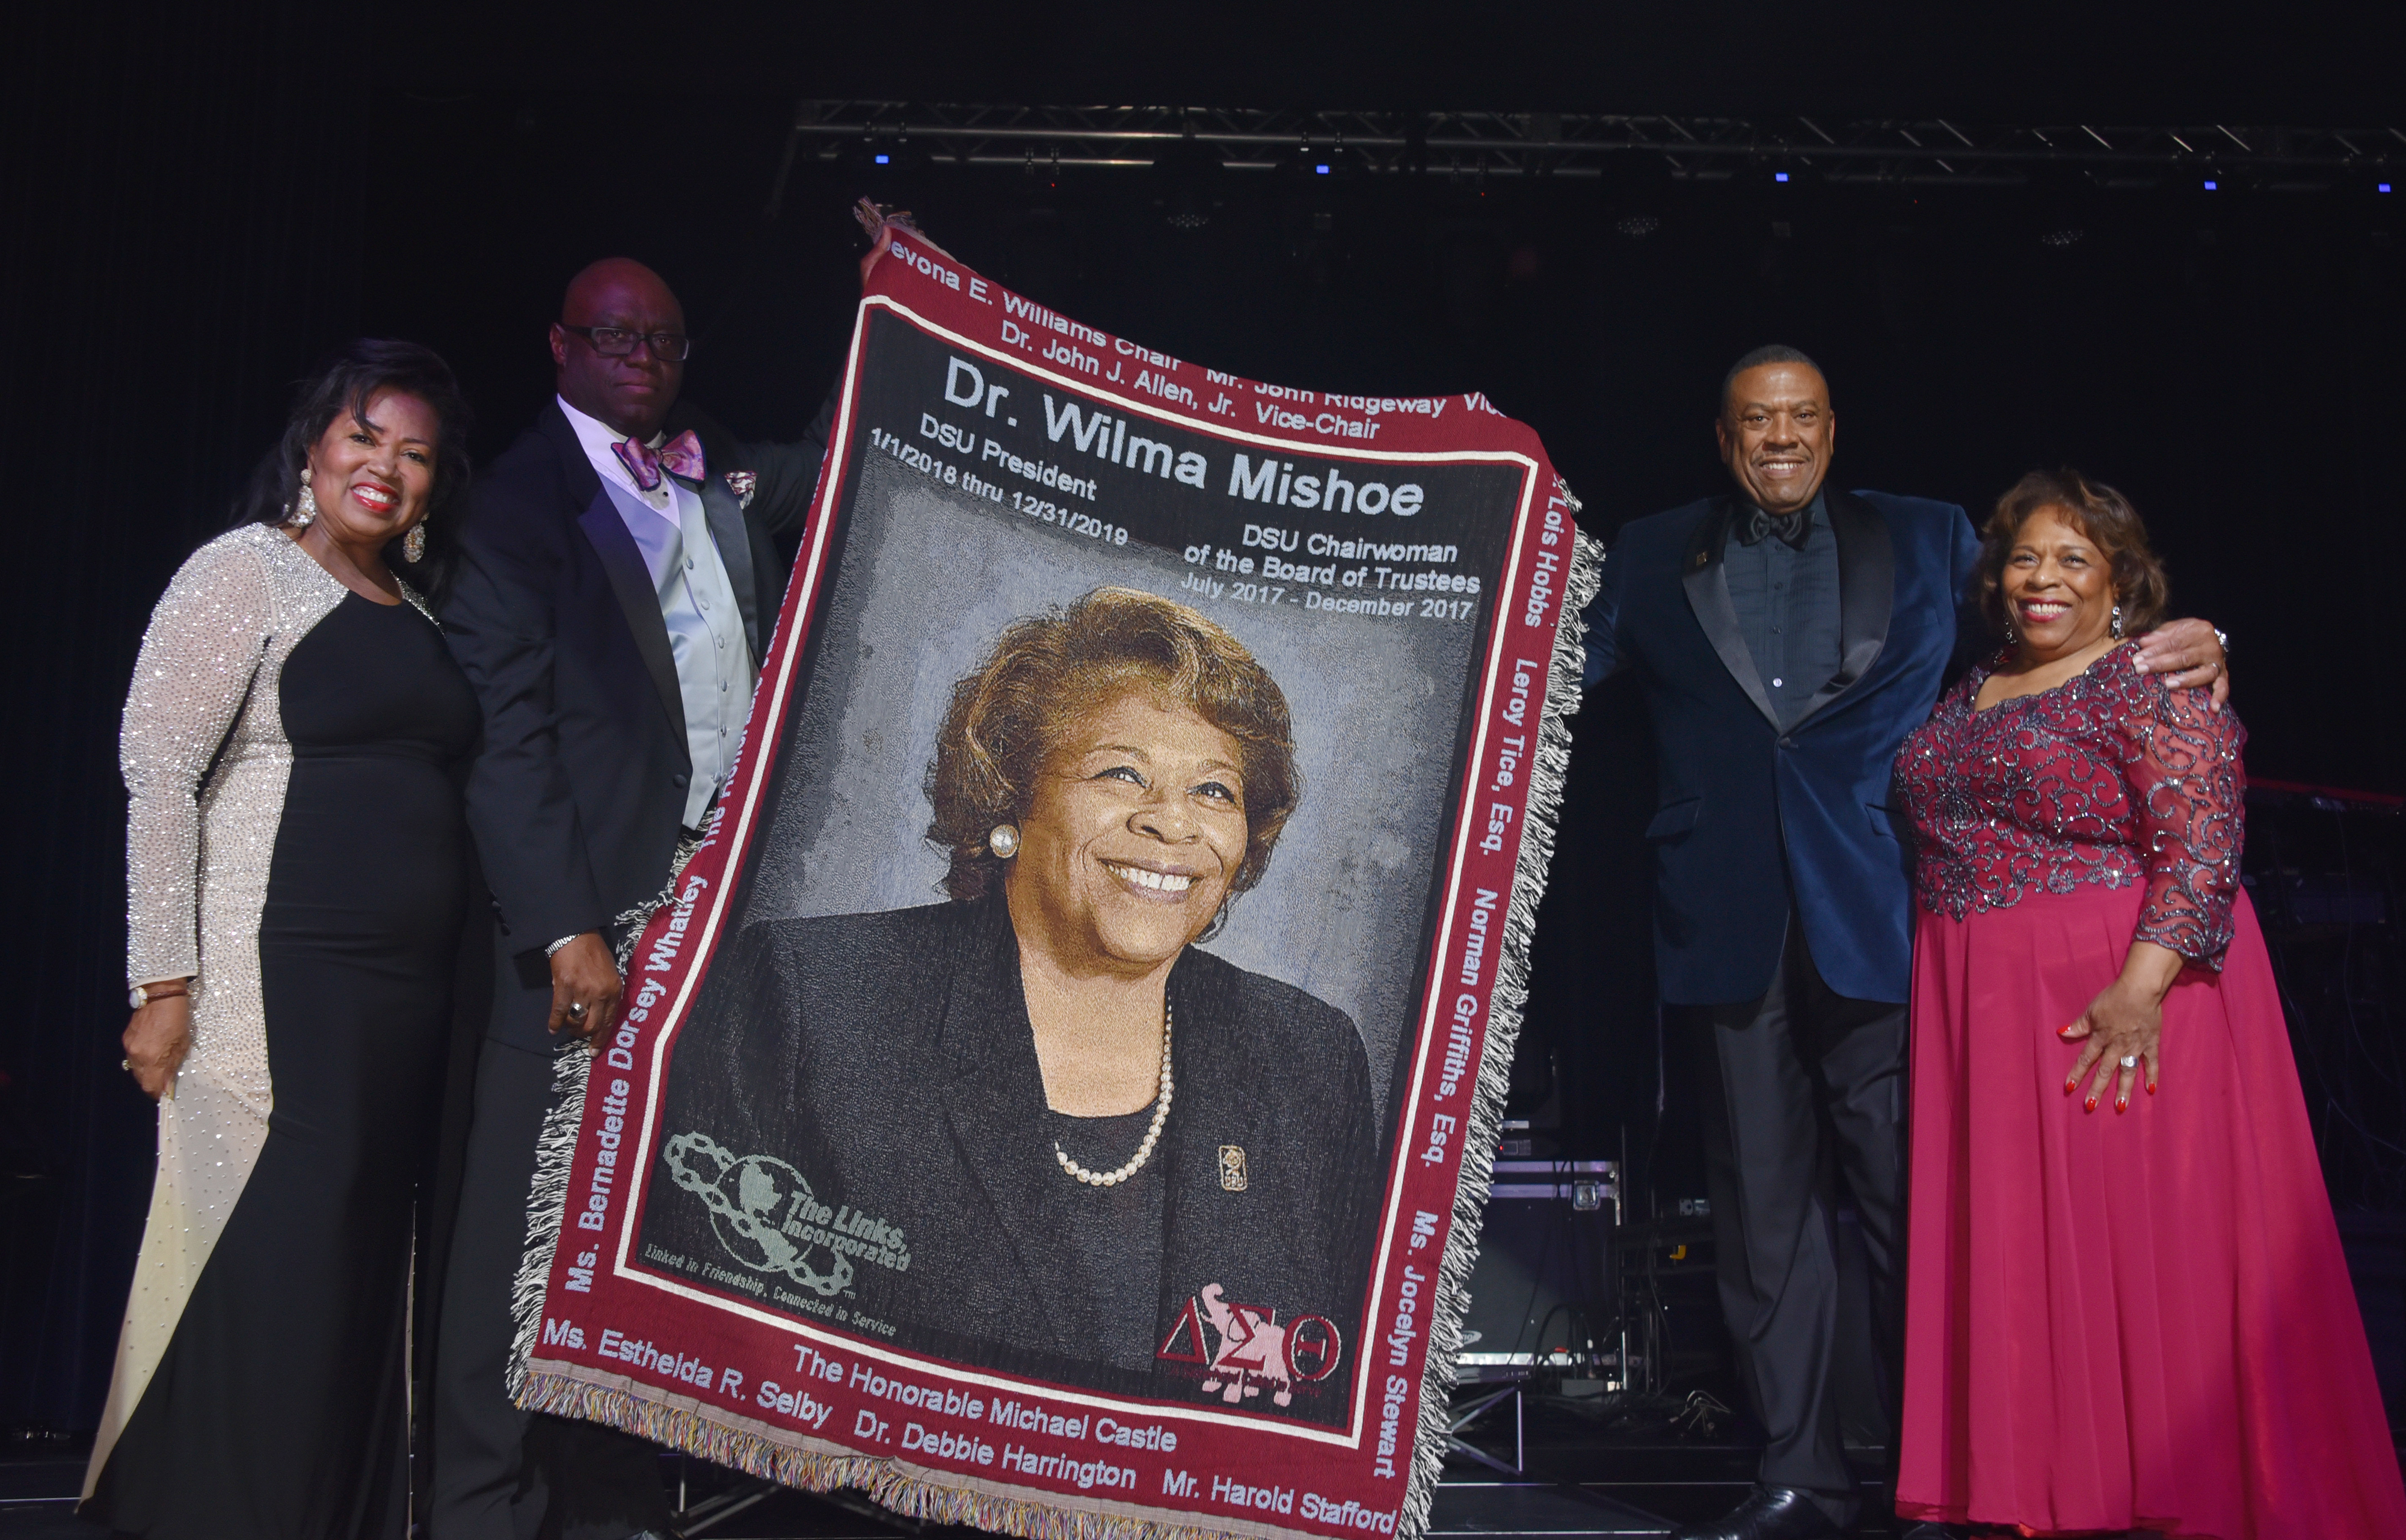 (L-r) Board of Trustees Chairperson Devona Williams, Trustee John Allen, and Vice Chairperson John Ridgeway presented outgoing University President Wilma Mishoe with an afghan bearing her portrait image in recognition of her presidential service to the institution.